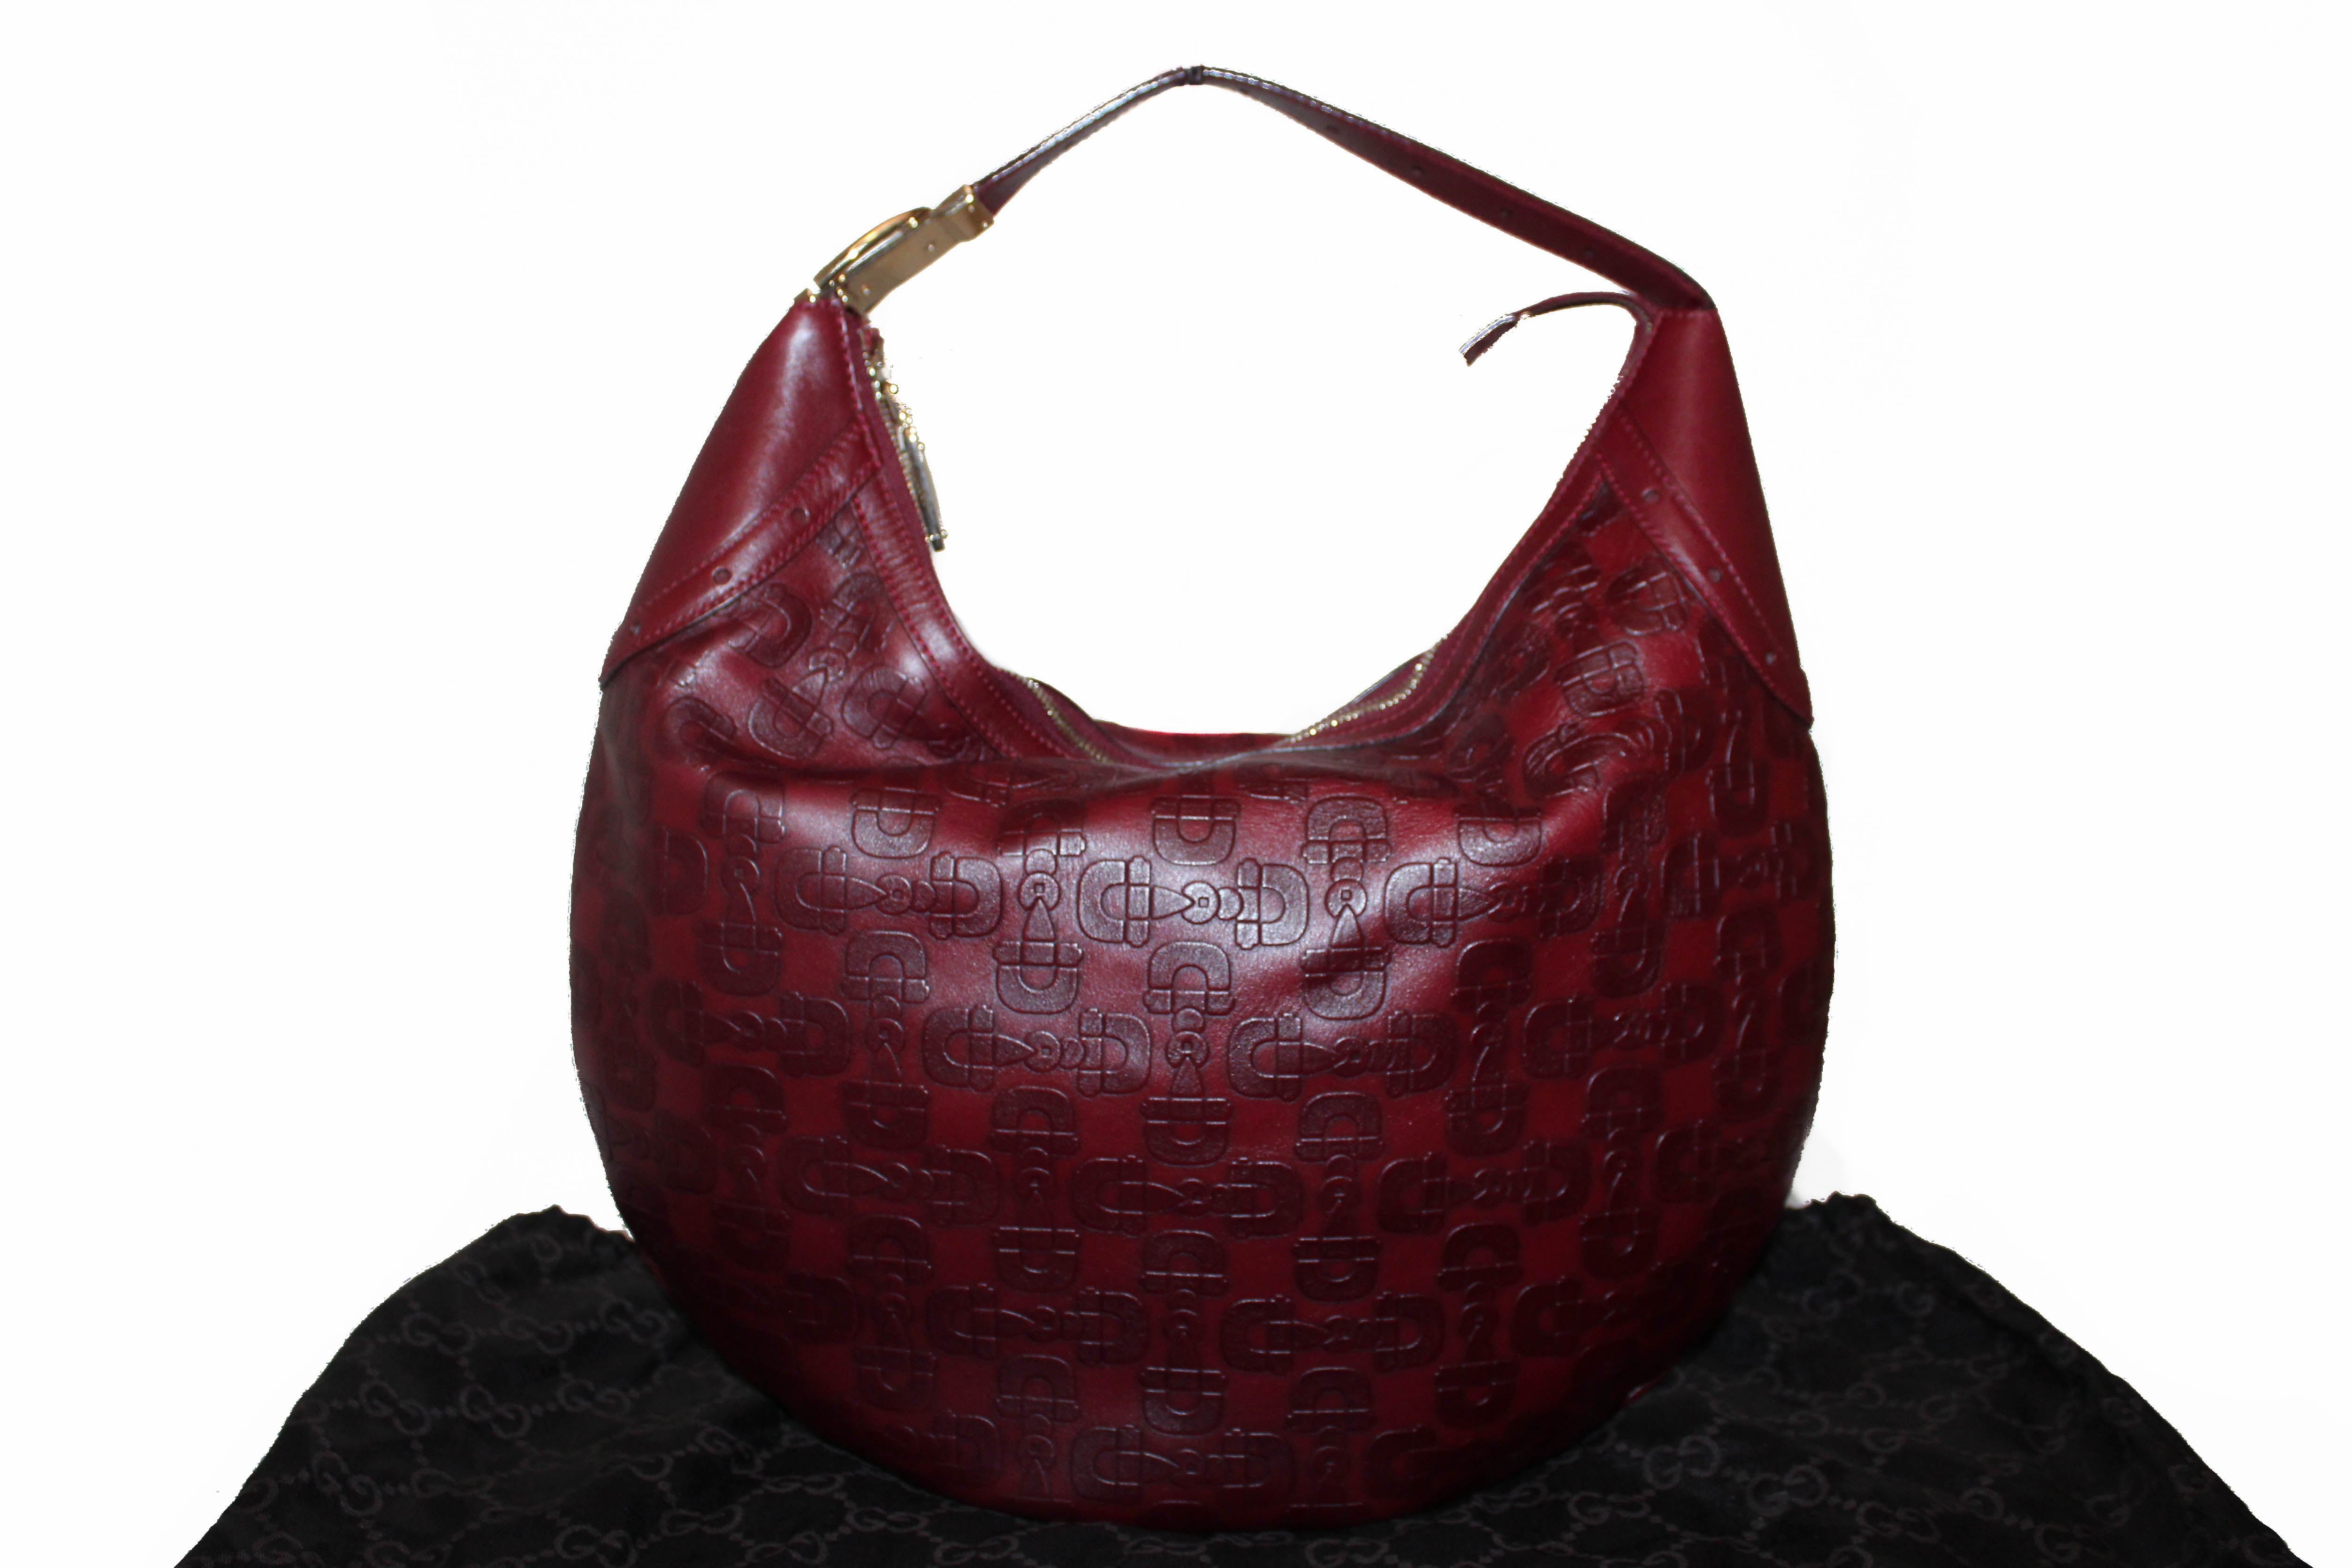 Gucci - Authenticated Hobo Handbag - Leather Burgundy for Women, Very Good Condition